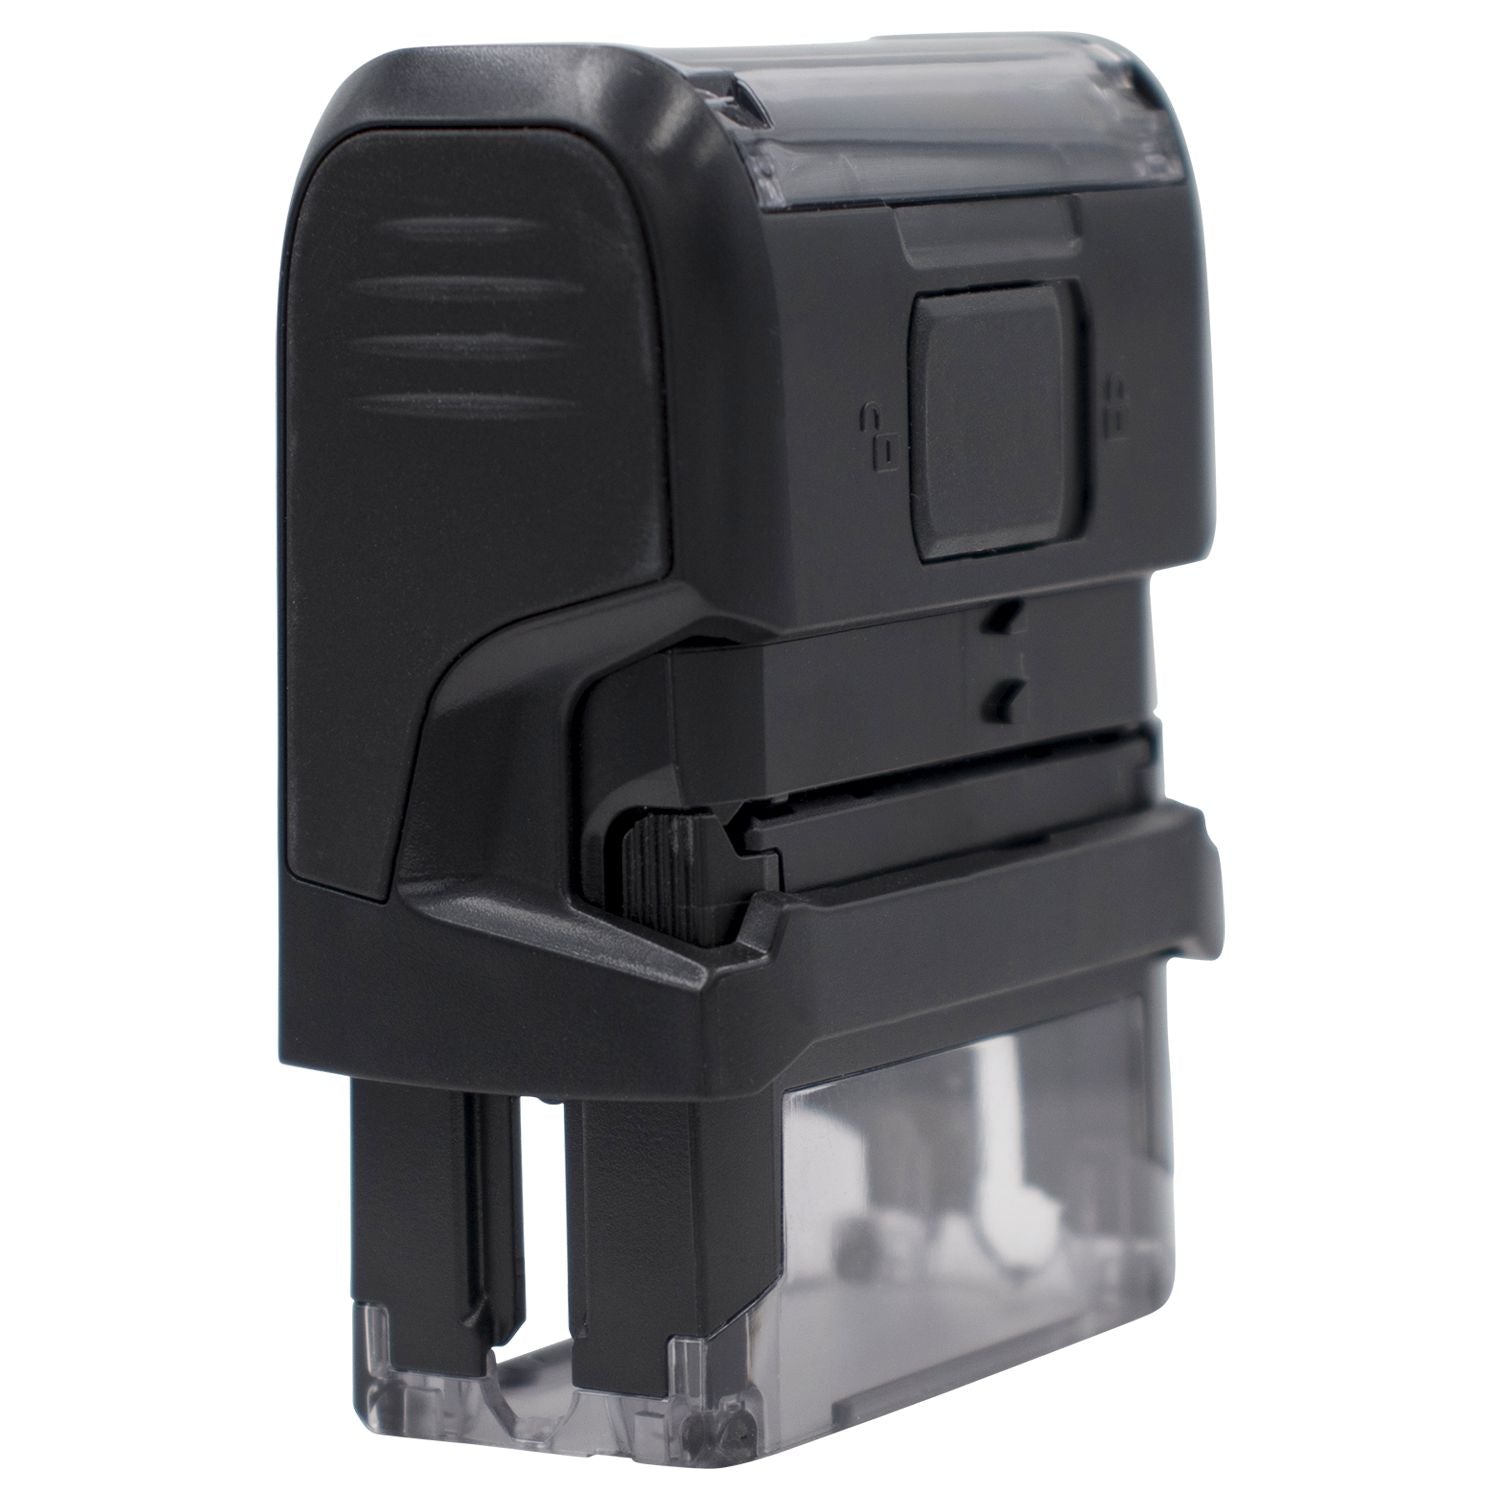 Self Inking No Referral Needed Stamp Back View